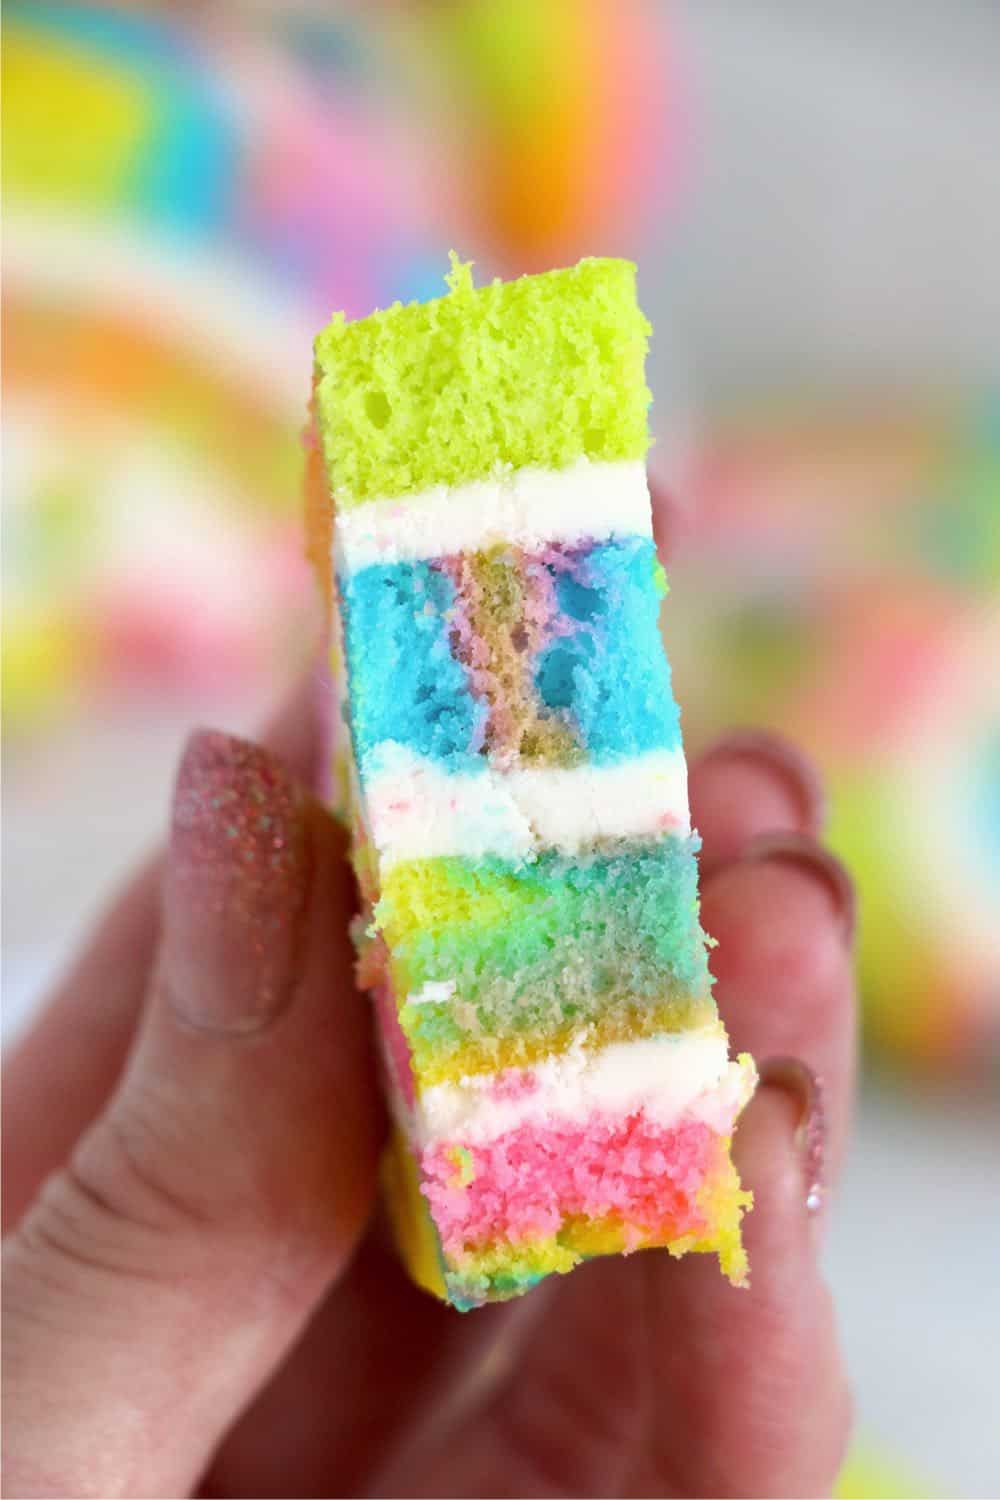 A hand with polished anils holding a slice of rainbow cake with layers of buttercream frosting